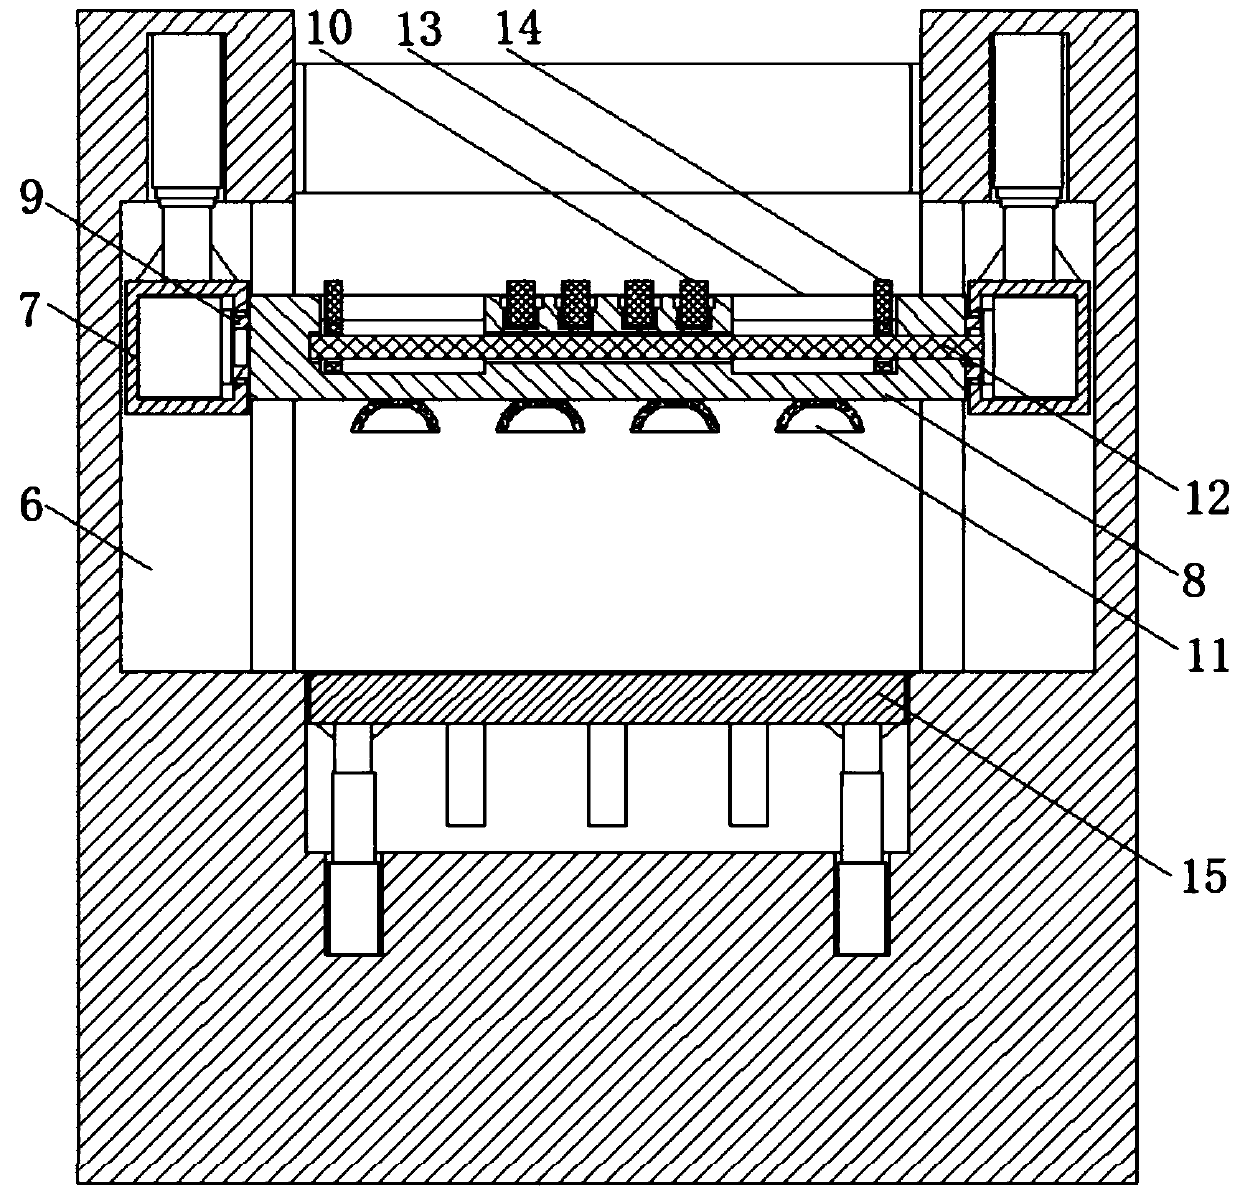 Aluminum-plastic plate punch forming device